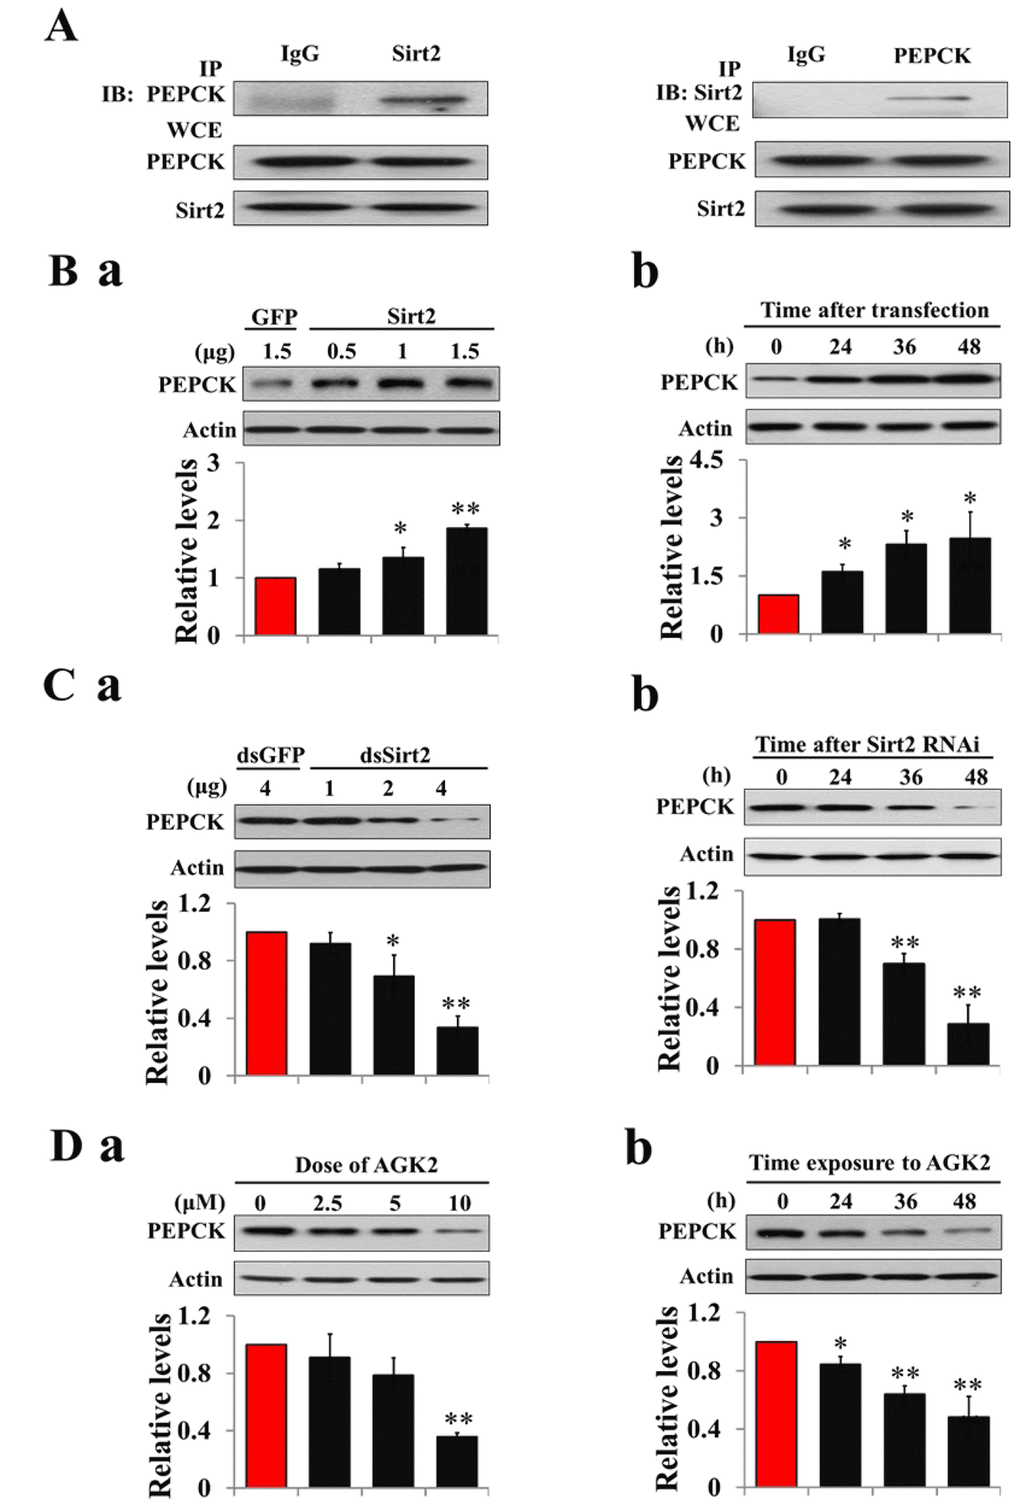 Sirt2 interacts with and stabilizes PEPCK levels. (A) Sirt2 directly binds to PEPCK. HzAm1 cells were co-transfected with GFP-Sirt2 and GFP-PEPCK-V5 plasmids for 48 h, and the cell extracts were immunoprecipitated (IP) with anti-V5 or anti-Sirt2 antibody, followed by immunoblotting (IB) with anti-Sirt2 or anti-V5 antibody, respectively. WCE: whole cell extracts. (B) Sirt2 transfection increases endogenous PEPCK protein levels in vitro. (a) Dose-dependent response to Sirt2 overexpression. HzAm1 cells were transfected with GFP-Sirt2 or GFP-V5 plasmid for 48 h. (b) Time-dependent response to Sirt2 transfection. HzAm1 cells were transfected with 1.5 μg of recombinant Sirt2 plasmid. (C) Sirt2 knockdown decreases endogenous PEPCK protein levels in vitro. (a) Dose-dependent response to Sirt2 RNAi. HzAm cells were transfected with Sirt2 or GFP dsRNA for 48 h. (b) Time-dependent response to RNAi. HzAm1 cells were transfected with 4 μg Sirt2 dsRNA. (D) Effects of Sirt2 inhibitor AGK2 on PEPCK protein levels. (a) Dose-dependent response to AGK2 treatment. HzAm1 cells were cultured with AGK2 for 48 h. (b) Time-dependent response to AGK2 treatment. HzAm cells were cultured with 10 μM AGK2. Proteins were extracted from the cells for IB with anti-PEPCK antibody. Protein bands were quantified using ImageJ software and normalized to the levels of H. armigera actin (5 μg). Each point represents the means±S.D. of three independent replicates. *, p